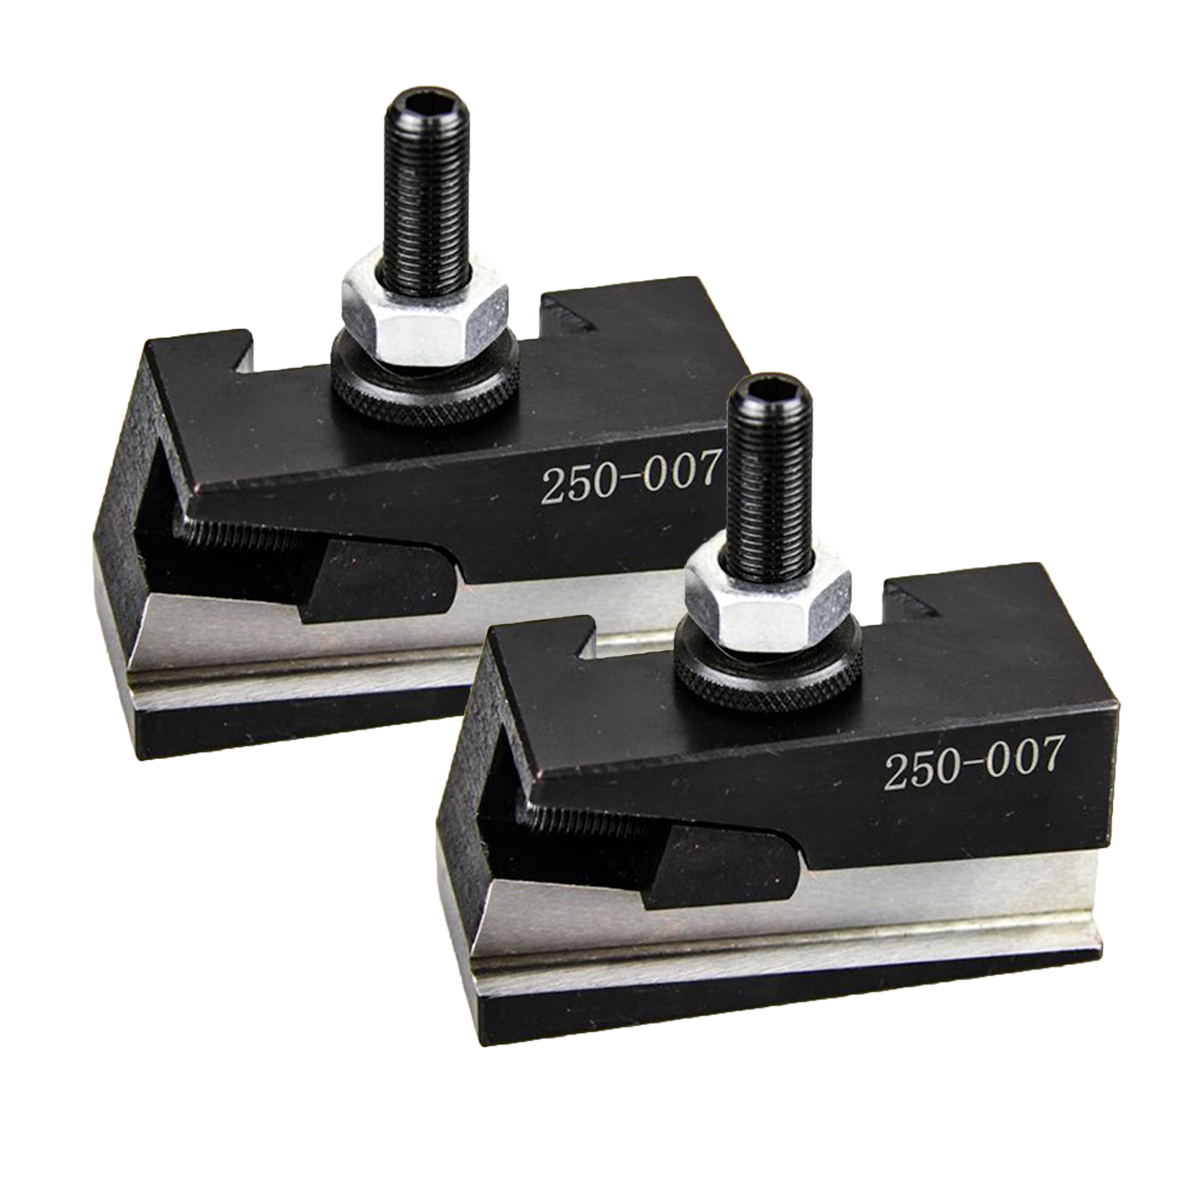 2-Piece-Set-Of-Machifit-250-000-Wedge-Main-Body-Tool-Holder-Exclusively-For-250-100250-111-Tool-Hold-1824364-5